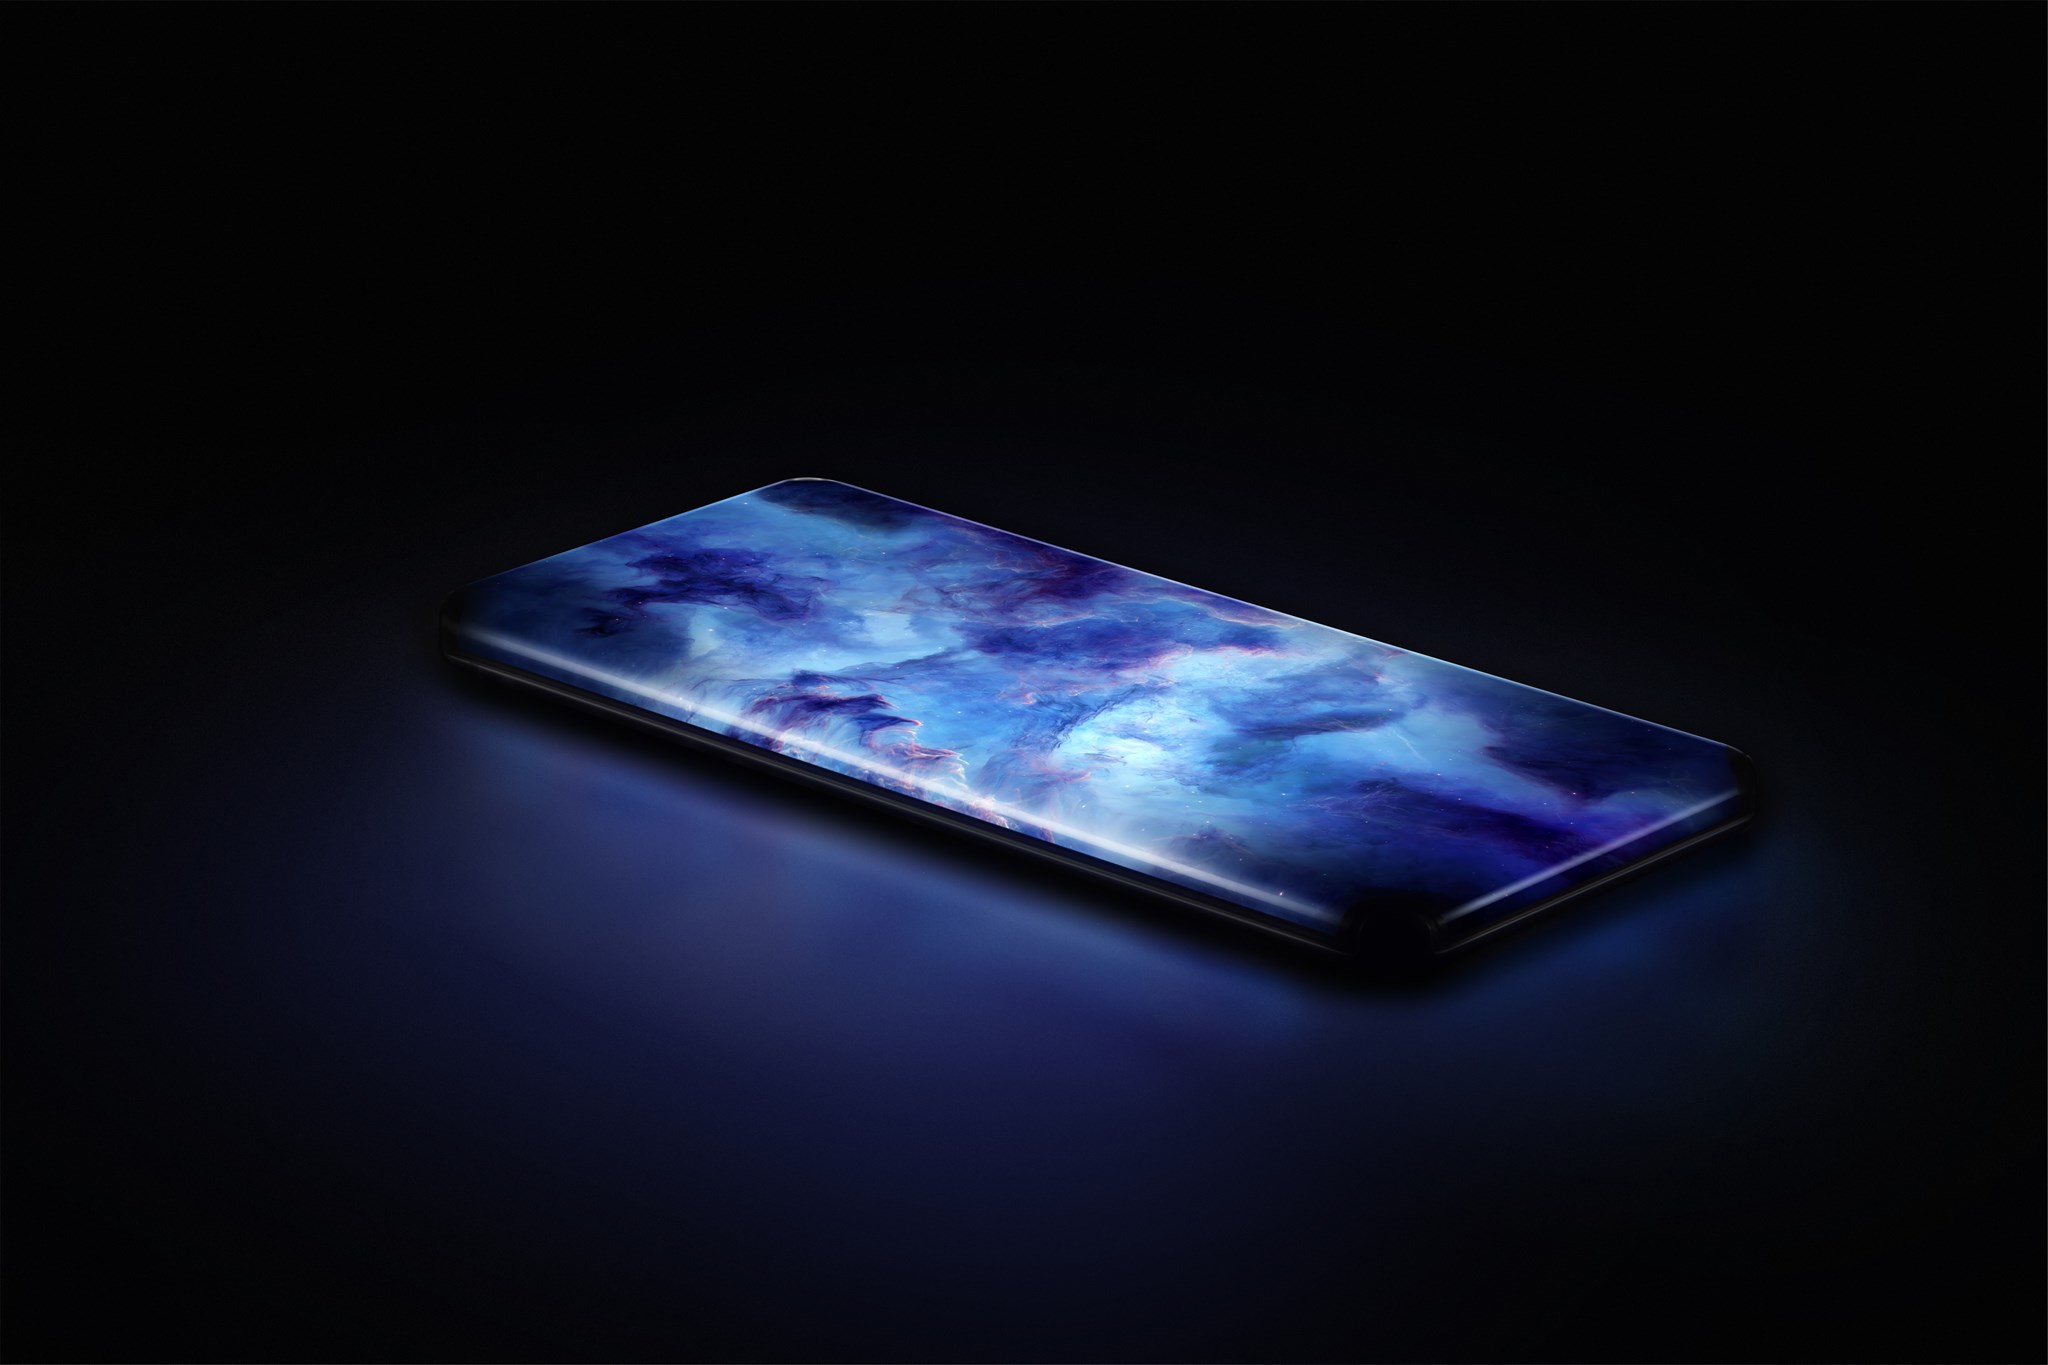 , Quad Curved Waterfall Display: Το απίστευτο concept smartphone της Xiaomi